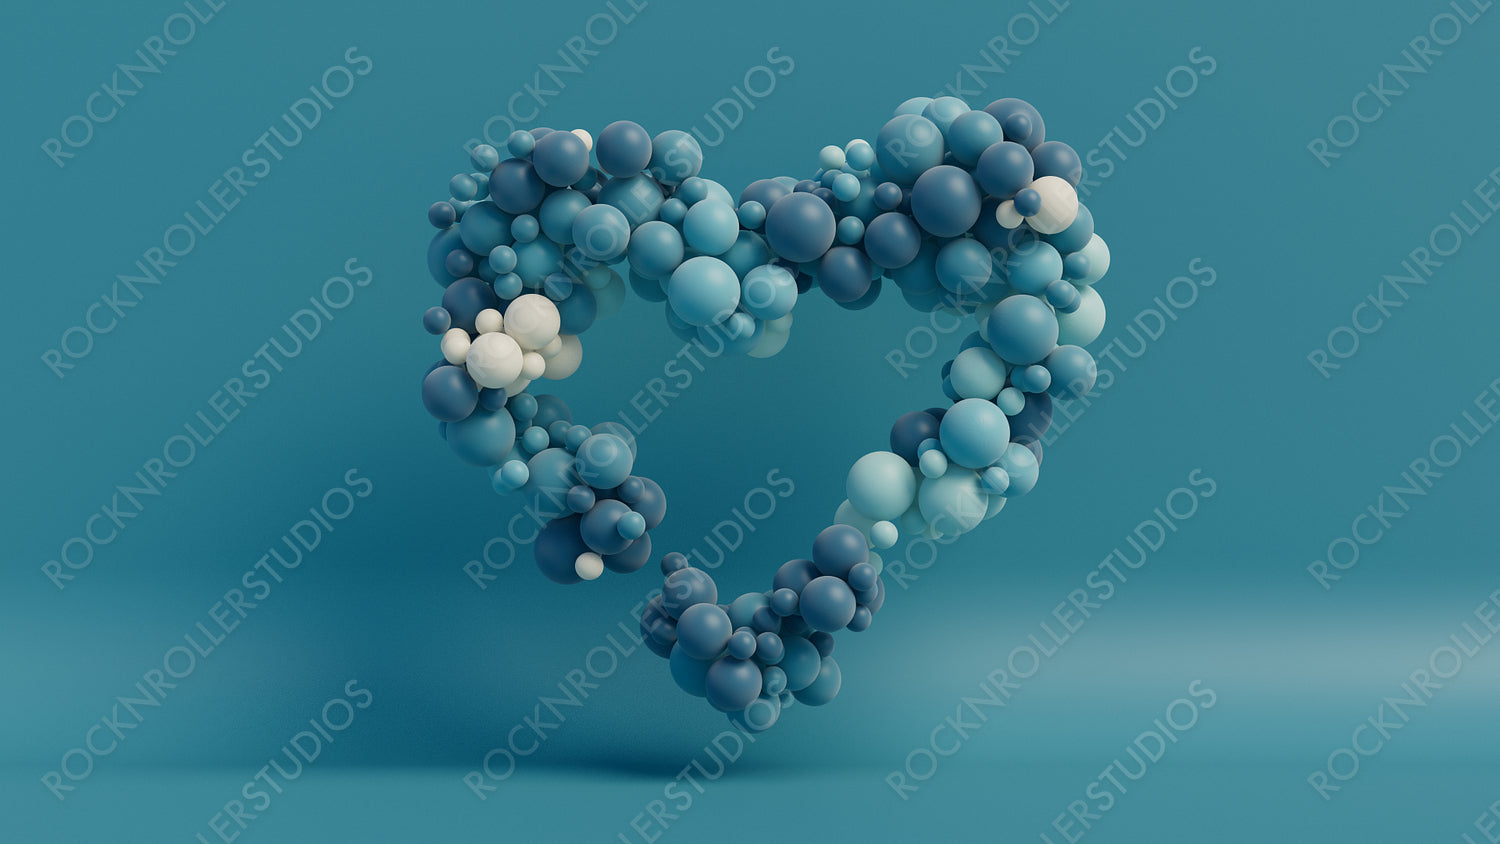 Multicolored Balloon Love Heart. Blue, Cyan and White Balloons arranged in a heart shape. 3D Render 